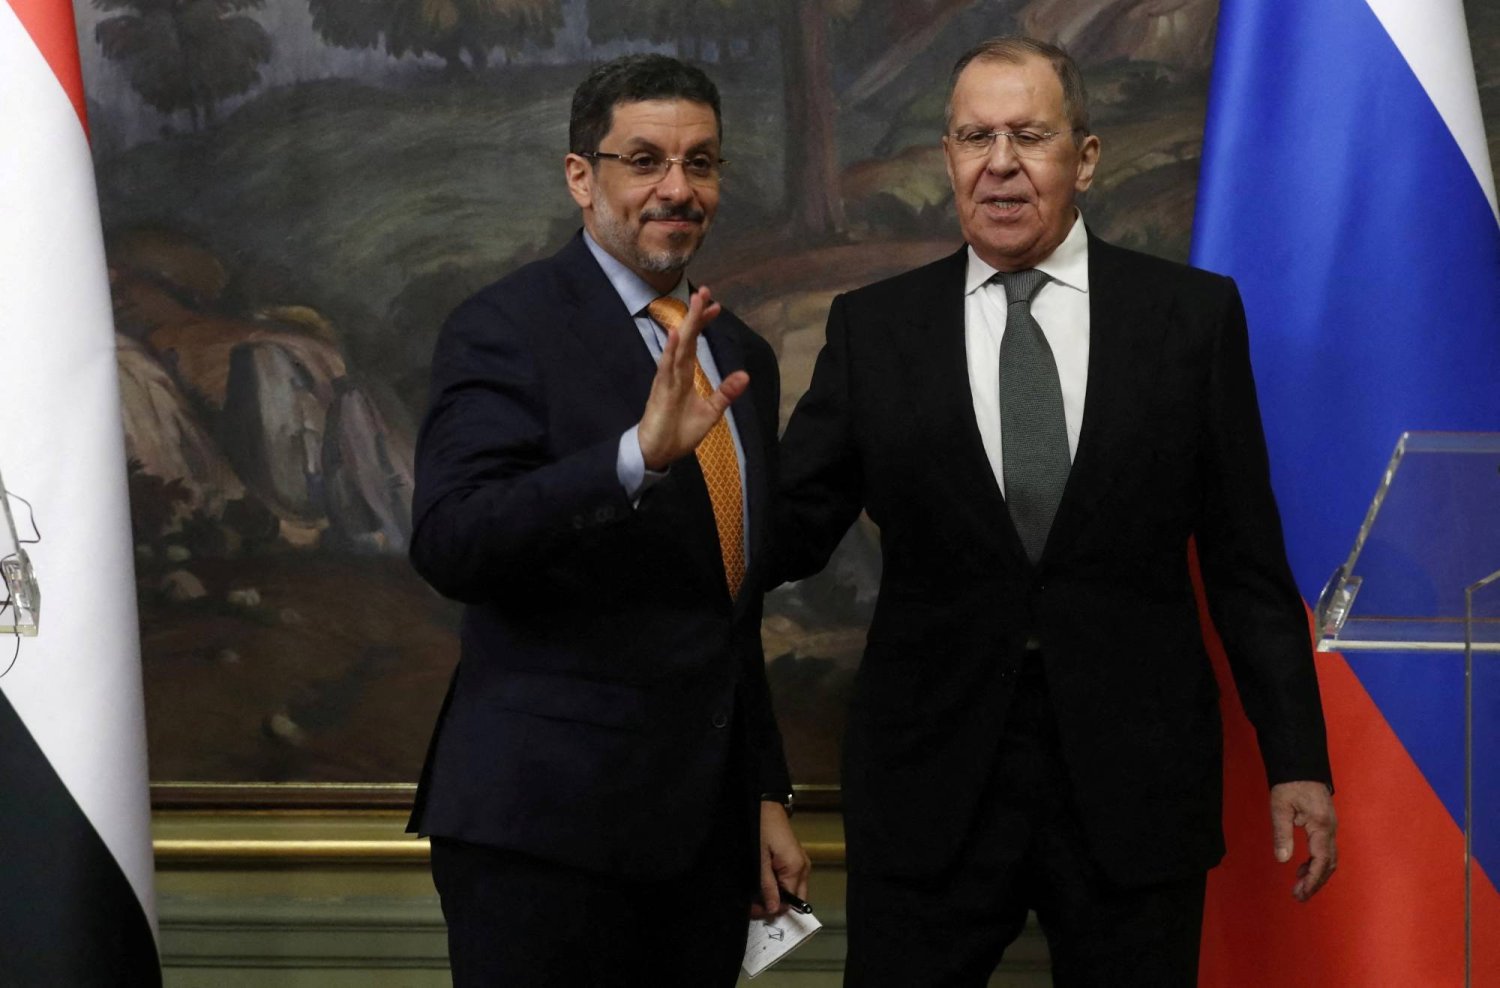 Yemeni Prime Minister Ahmed Awad bin Mubarak and Russian Foreign Minister Sergei Lavrov attend a press conference in Moscow on Tuesday. (Reuters) 